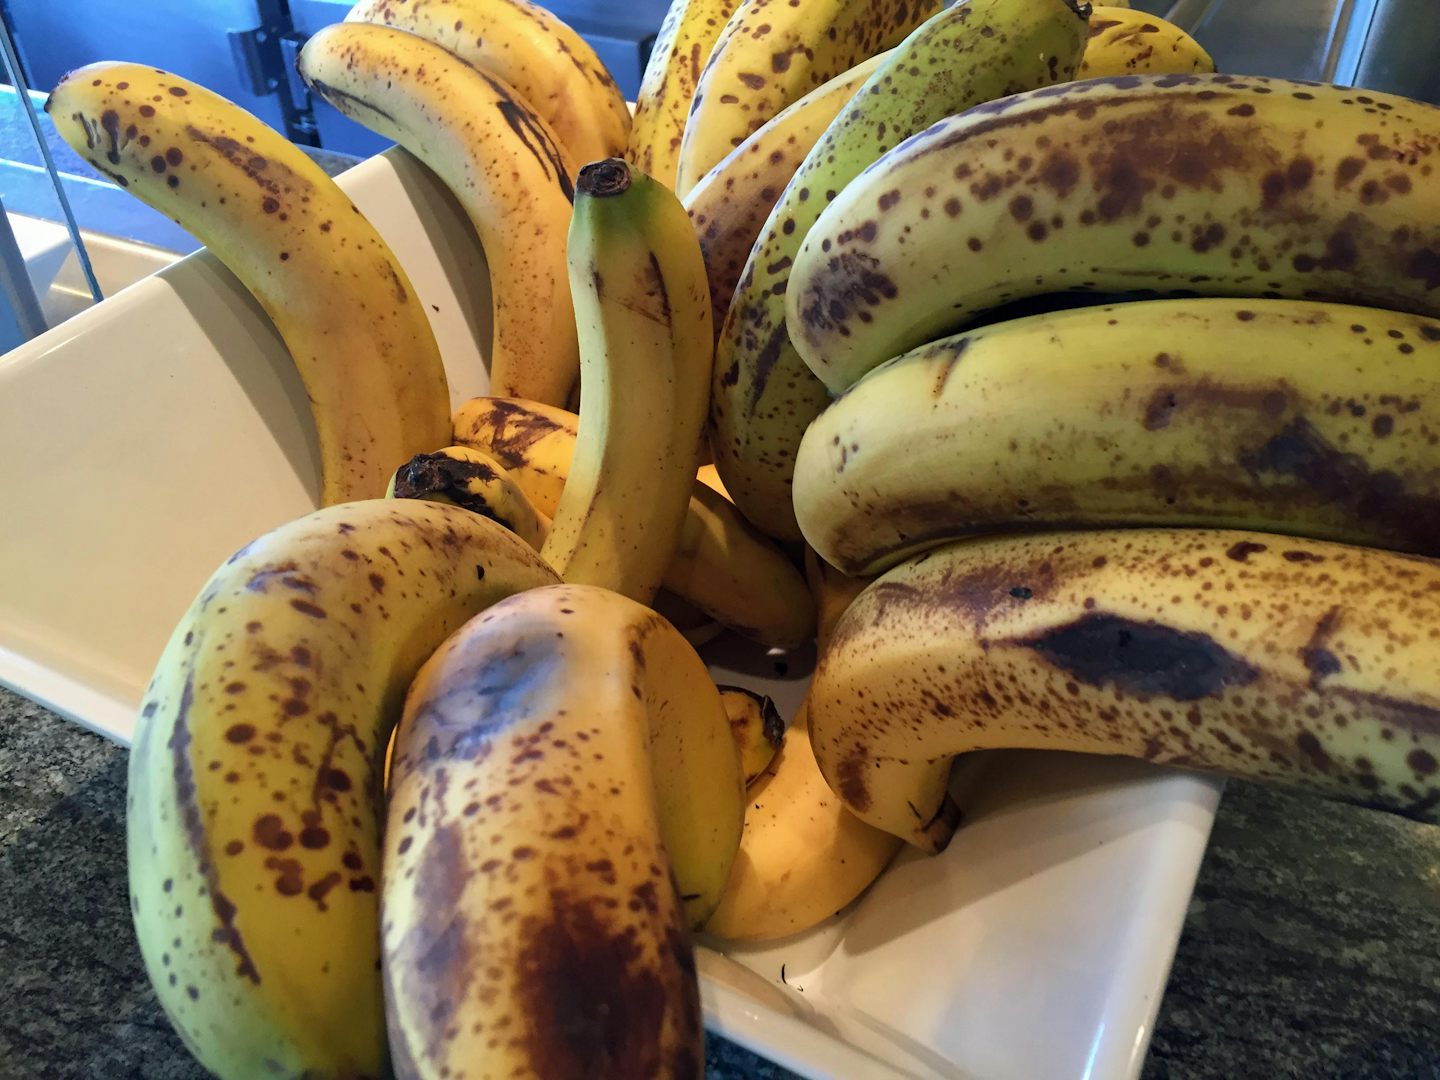 These were bananas served in the buffet on last morning of cruise.